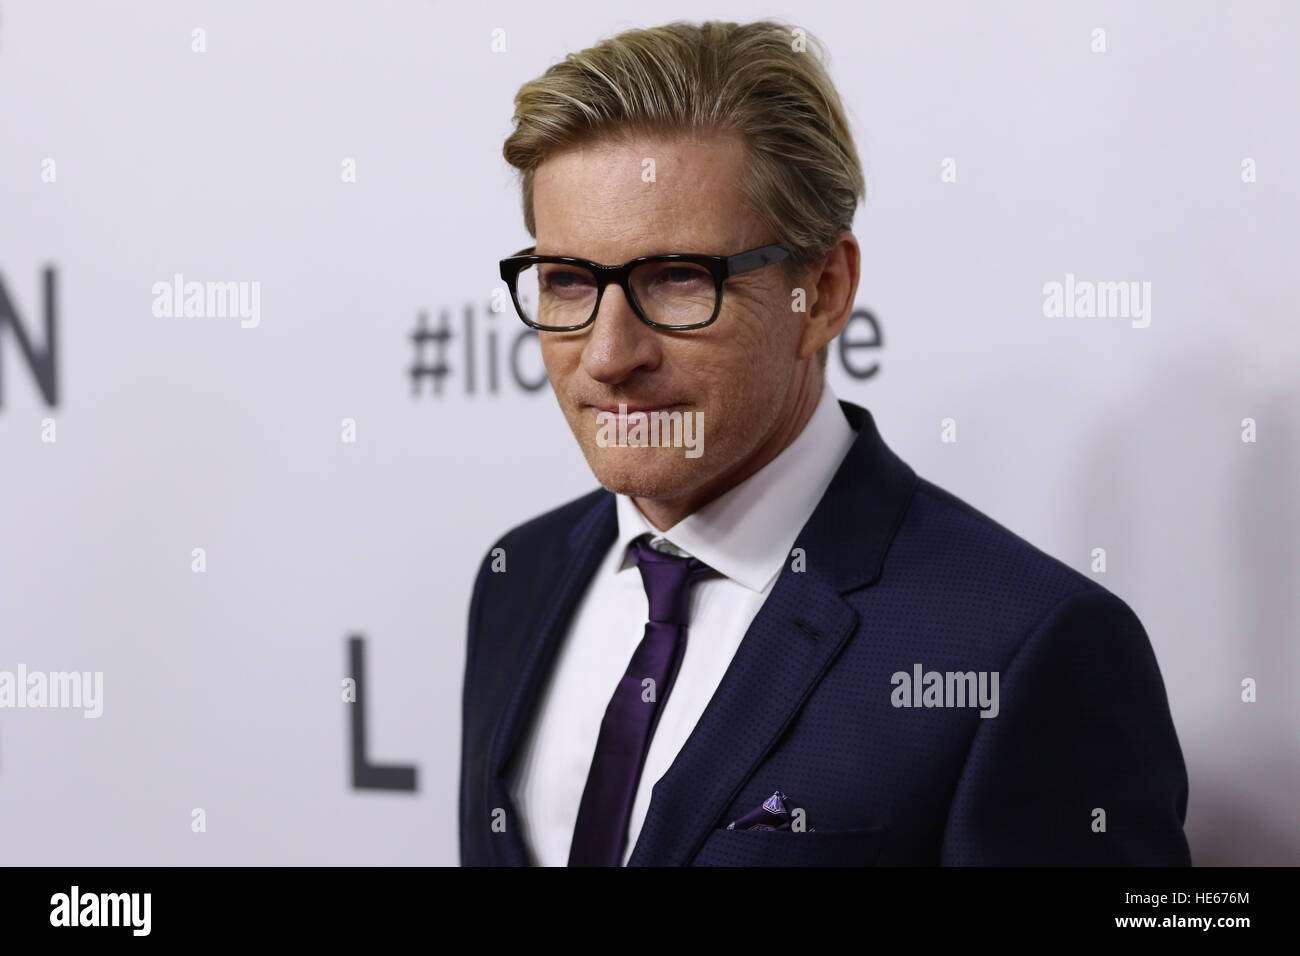 Sydney, Australia. 19 December 2016. Pictured: David Wenham. The cast and crew of LION arrived on the red carpet for the Australian premiere at the State Theatre in Sydney.  The highly anticipated film comes from the producers of The King’s Speech and is based on the incredible true story of Saroo Brierley. Saroo is portrayed by Dev Patel in the film and his parents John and Sue Brierley are played by Nicole Kidman and David Wenham – the Brierley family will join the cast on the red carpet. Credit: © Richard Milnes/Alamy Live News Stock Photo